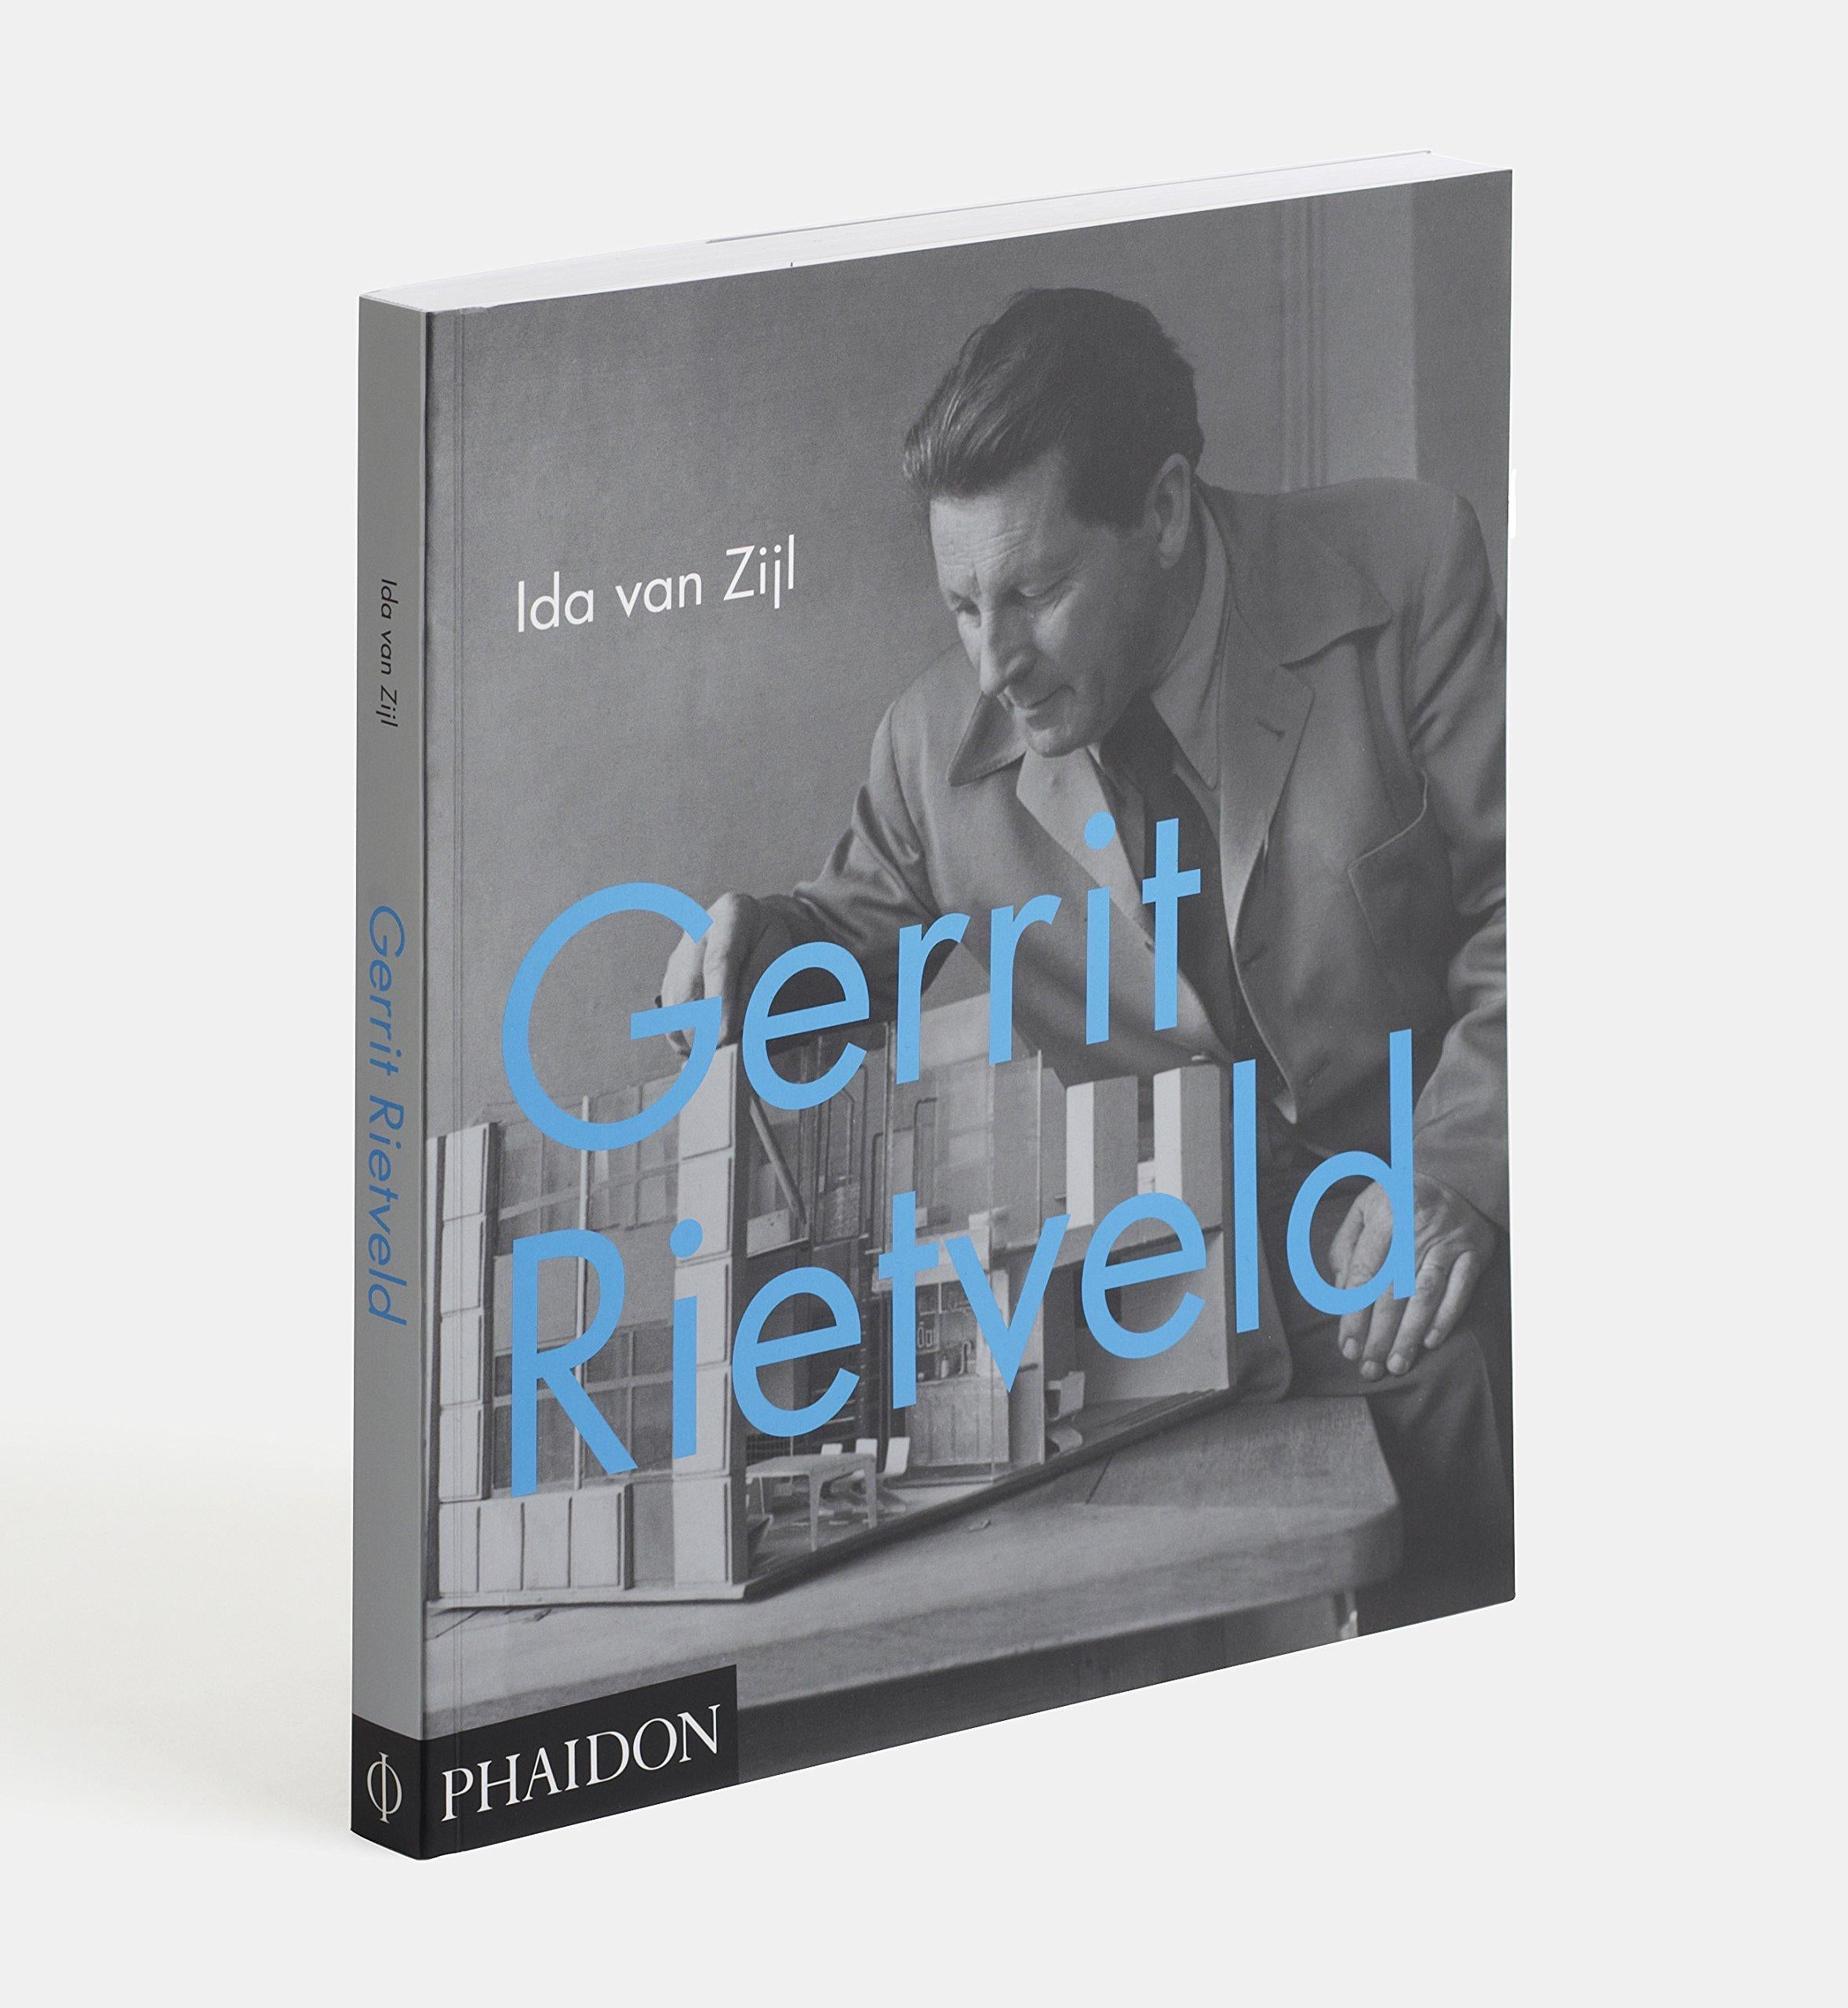 The richly illustrated and accessible monograph on the Dutch designer and world-renowned architect - now in paperback

Gerrit Rietveld's simple yet dynamic style greatly influenced international furniture design and contributed significantly to